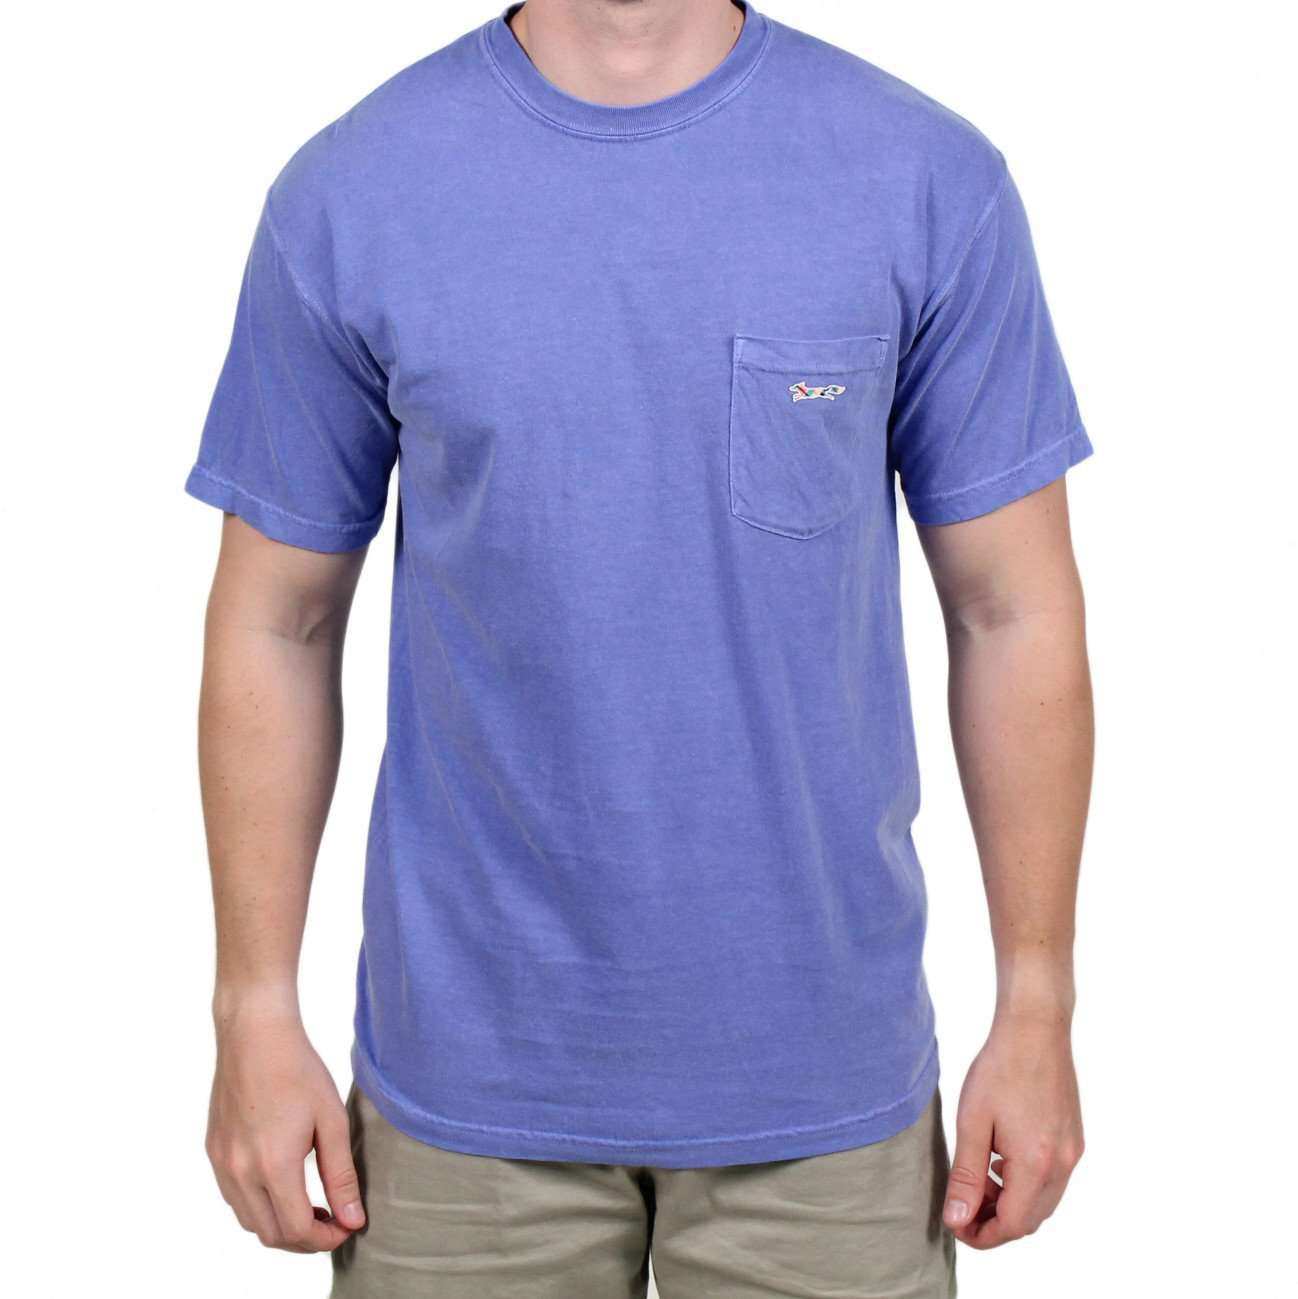 Longshanks Sewn Patch Short Sleeve Pocket Tee in Flo Blue by Country Club Prep - Country Club Prep